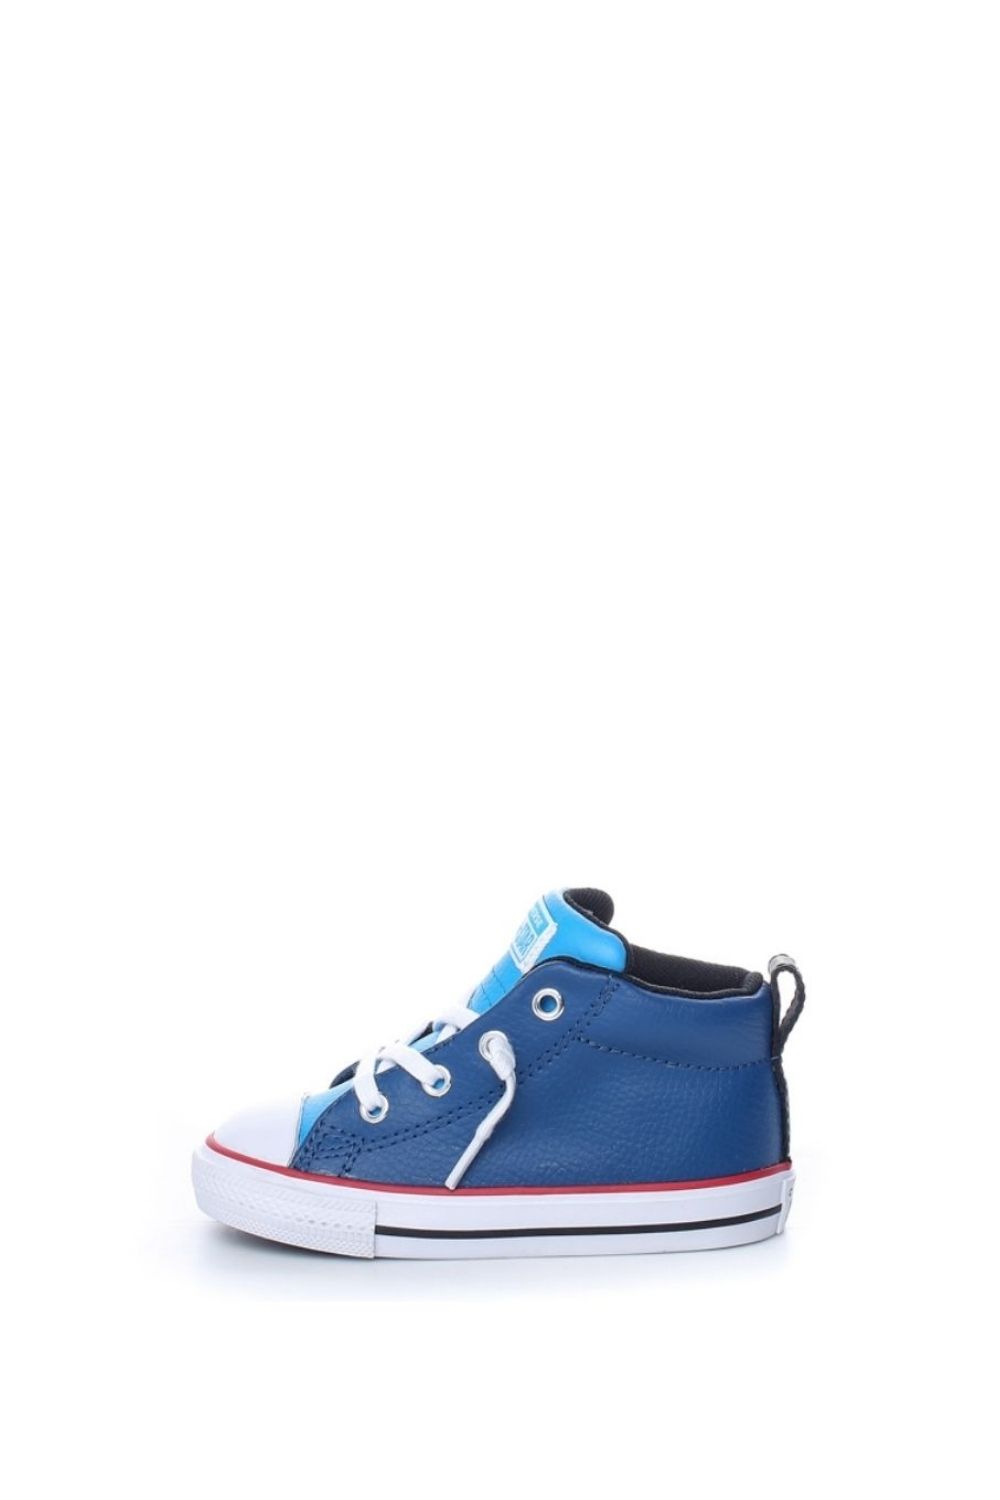 CONVERSE – Βρεφικα ψηλα sneakers CONVERSE Chuck Taylor All Star Street μπλε